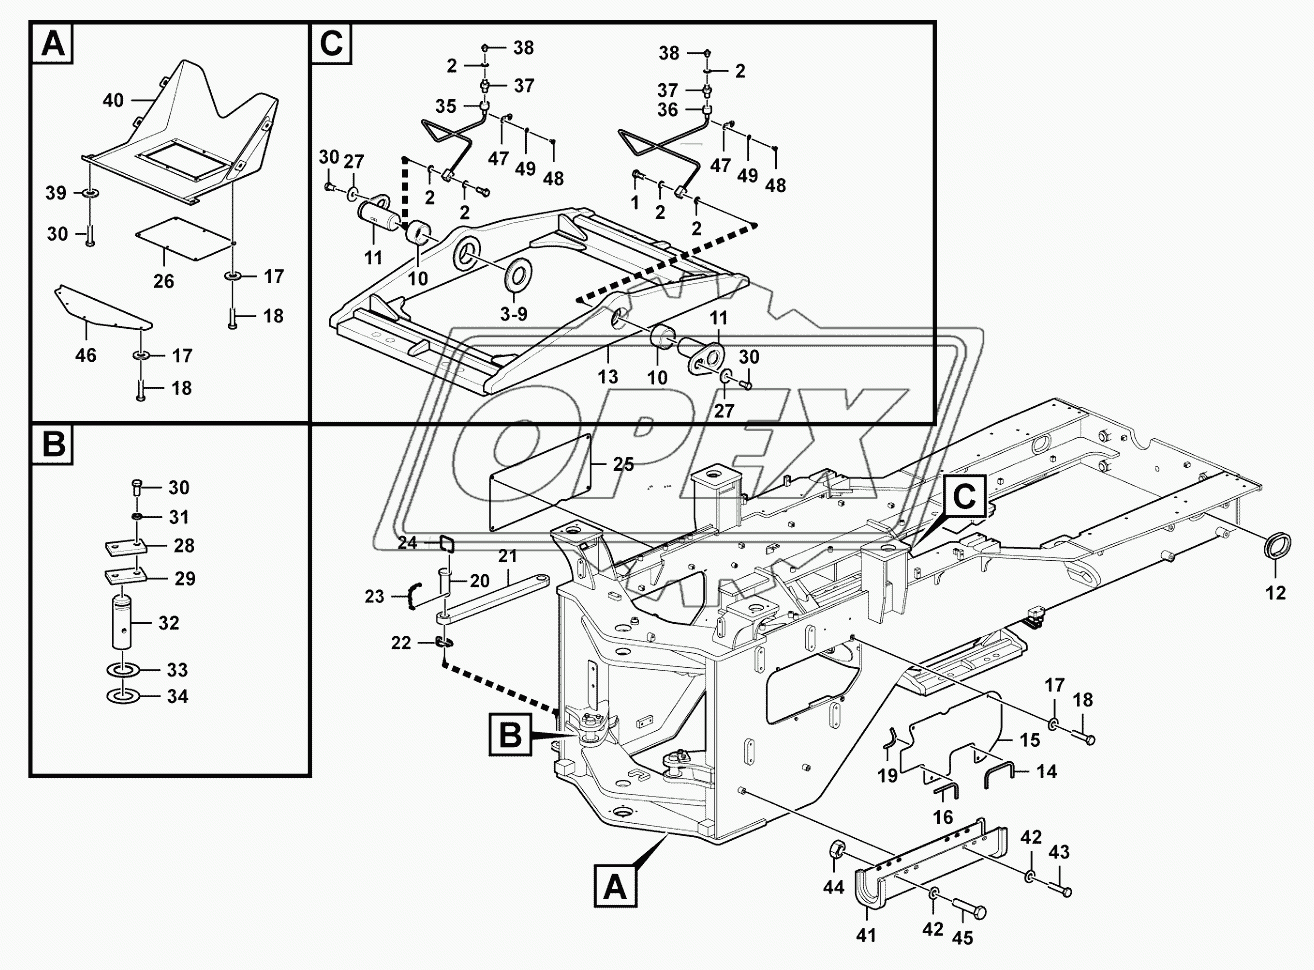 Rear frame accessories